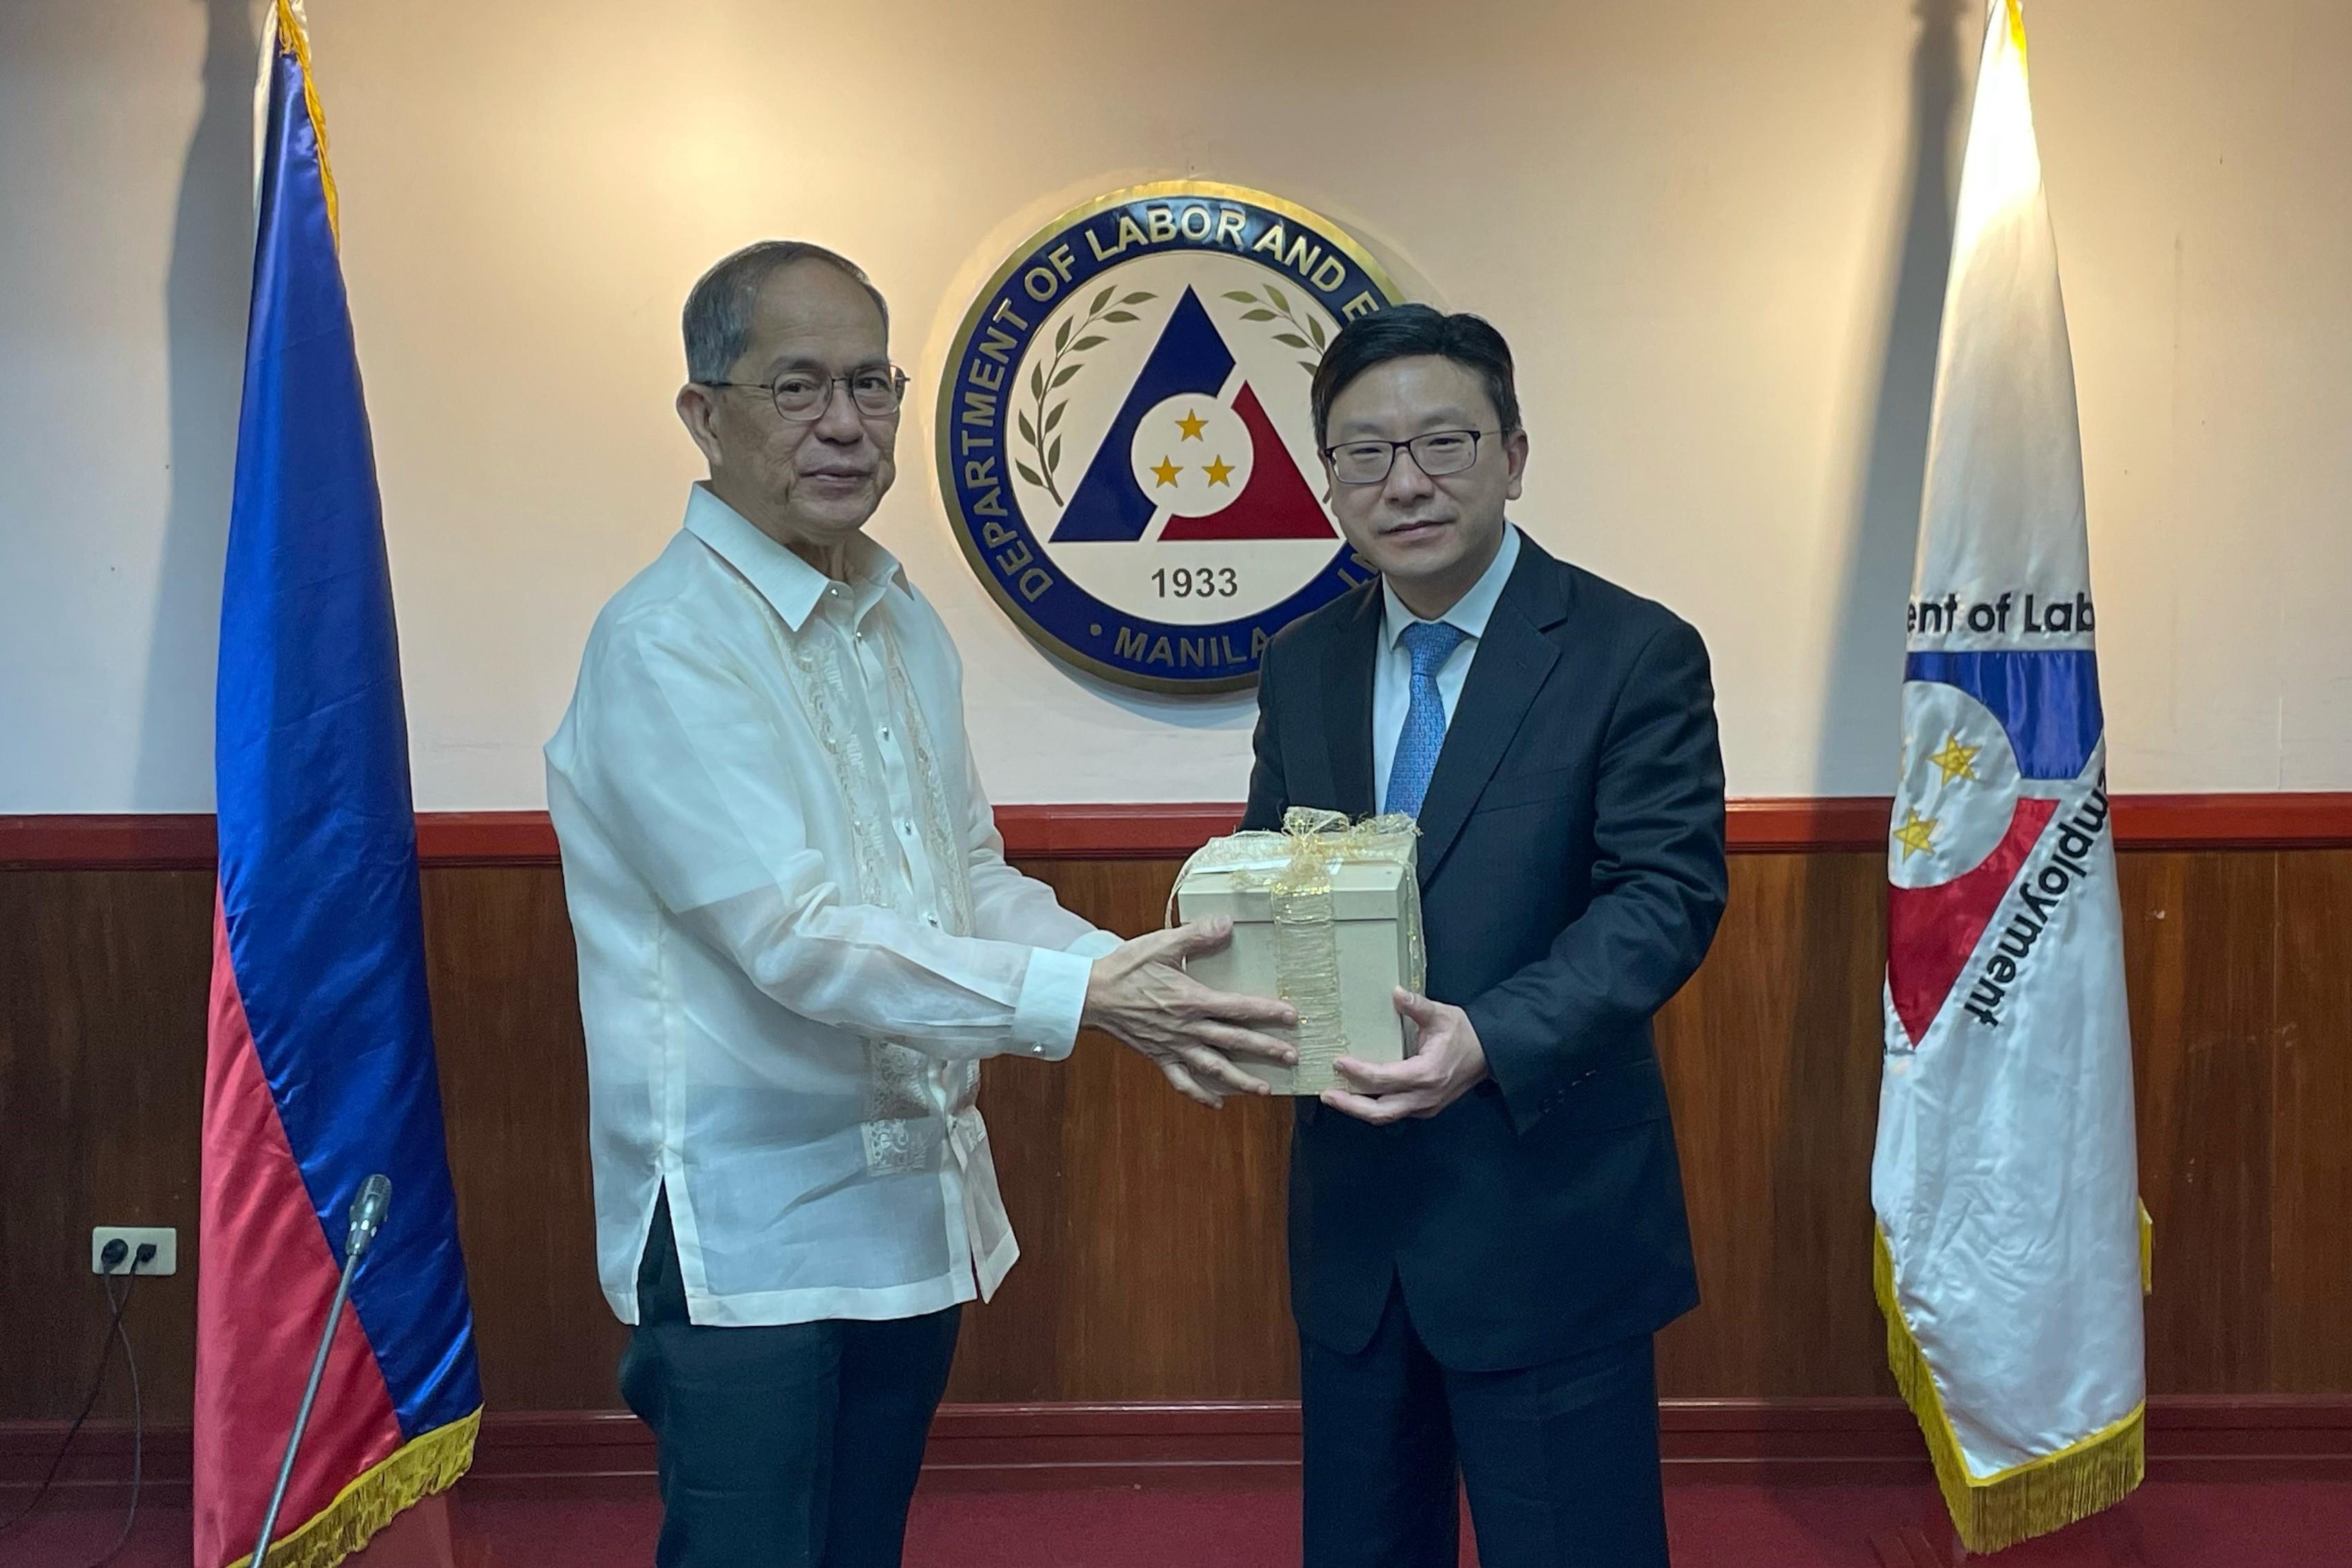 The Secretary for Labour and Welfare, Mr Chris Sun (right), called on the Secretary of Labor and Employment of the Philippines, Mr Bienvenido Laguesma (left), this afternoon (January 10) during his visit to Manila, the Philippines. They exchanged views on protecting foreign domestic helpers working in Hong Kong.